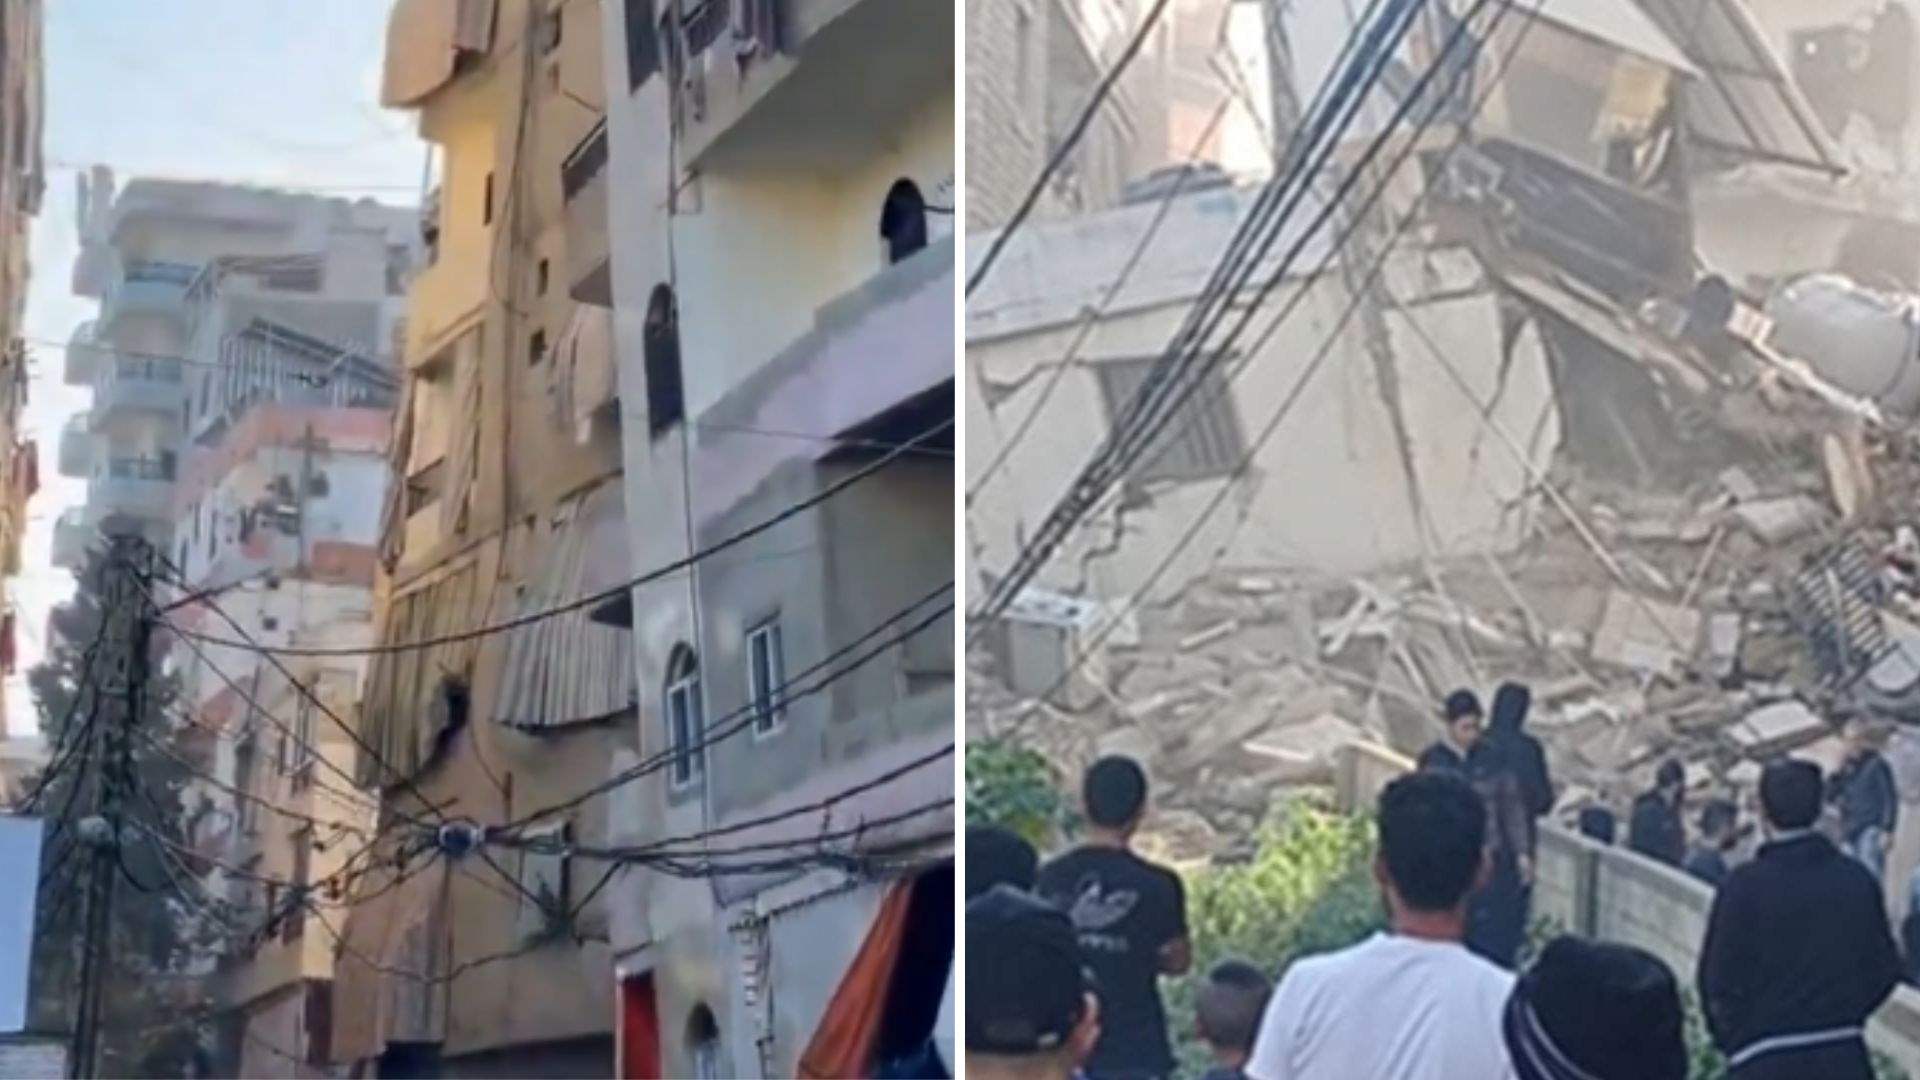 Building collapse in Choueifat: Families narrowly evade disaster 